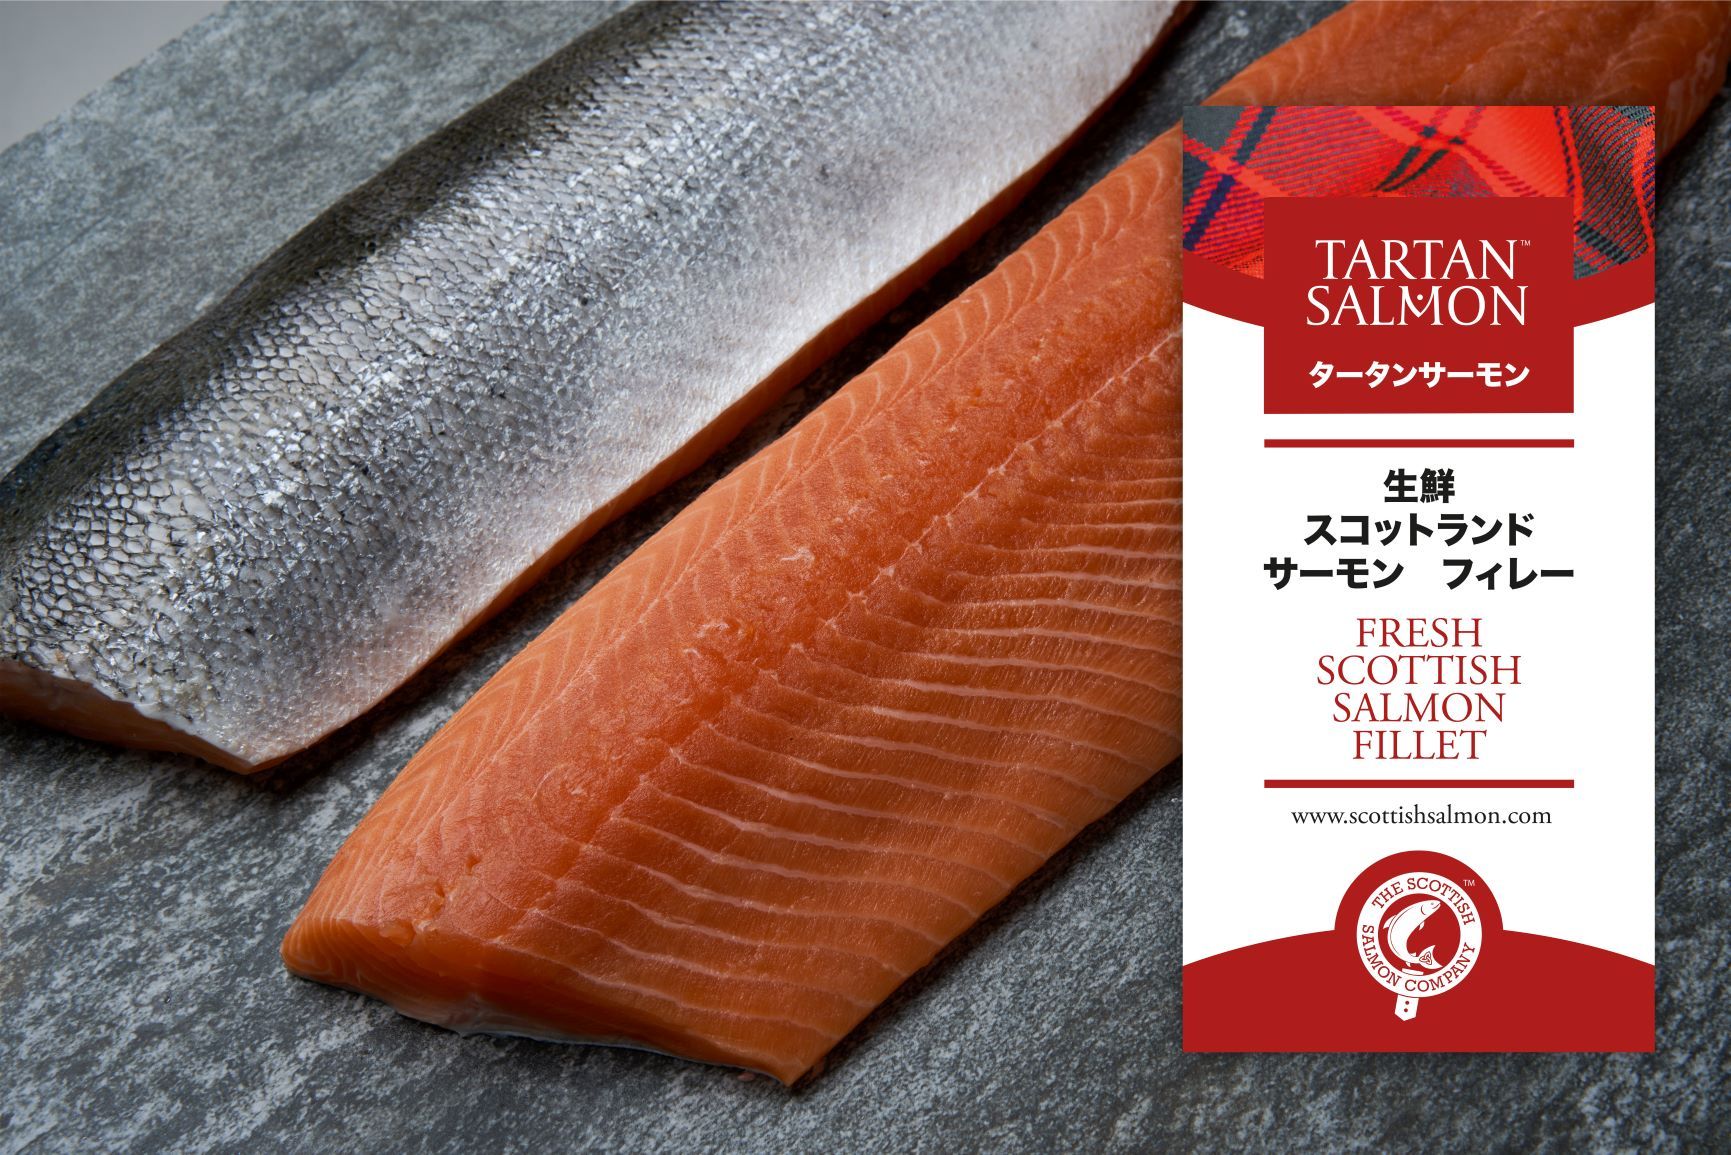 The Scottish Salmon Company's Tartan Salmon was introduced to the Japanese market last week